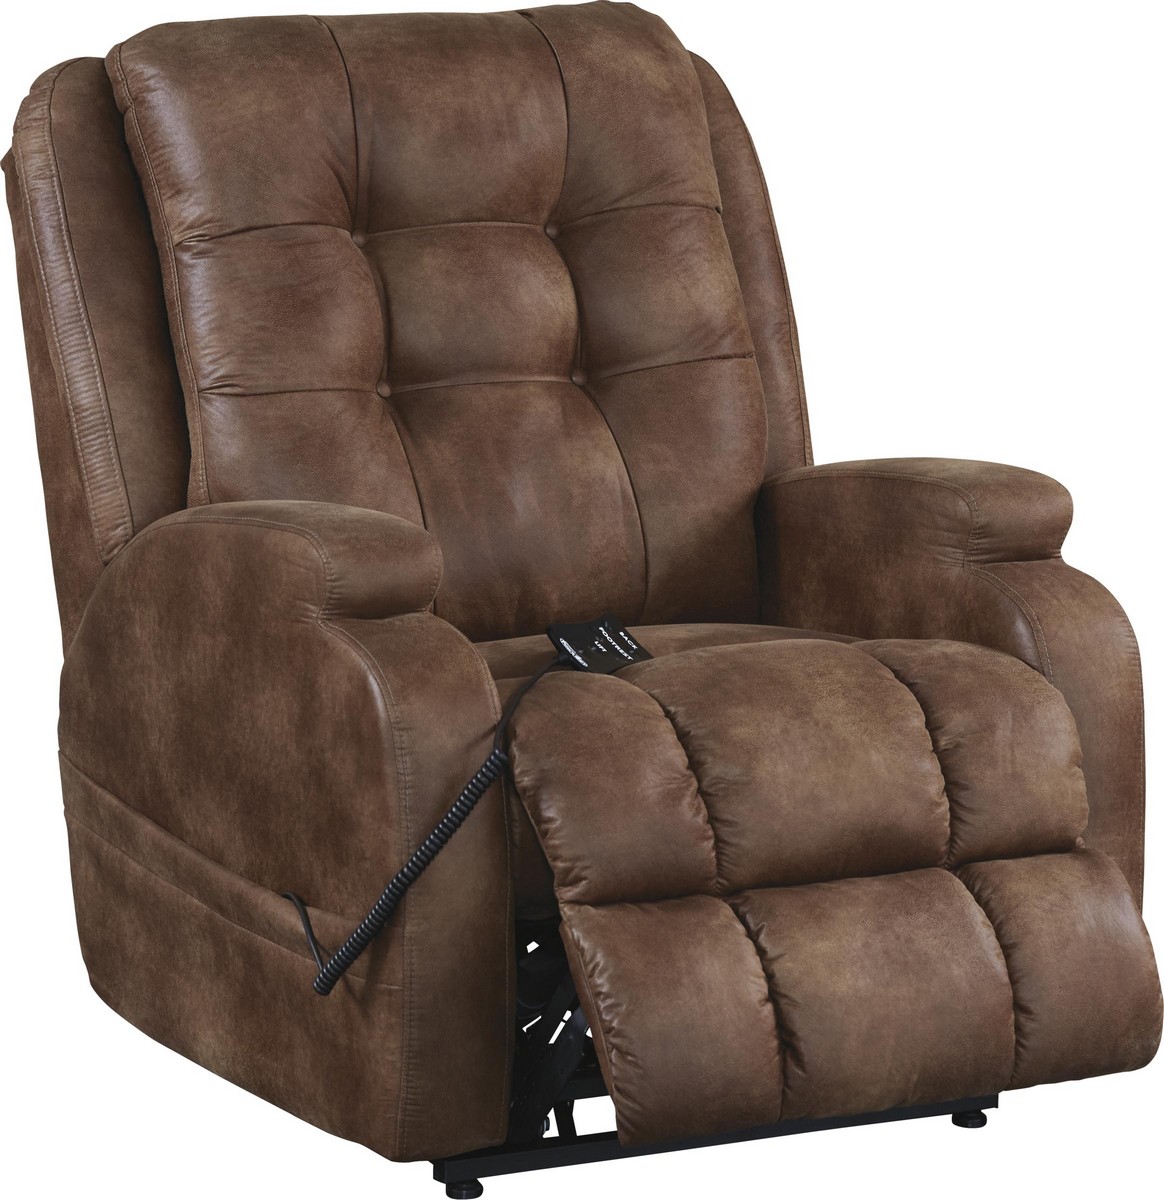 CatNapper Jenson Power Lift Lay Flat Recliner with Dual Motor - Almond